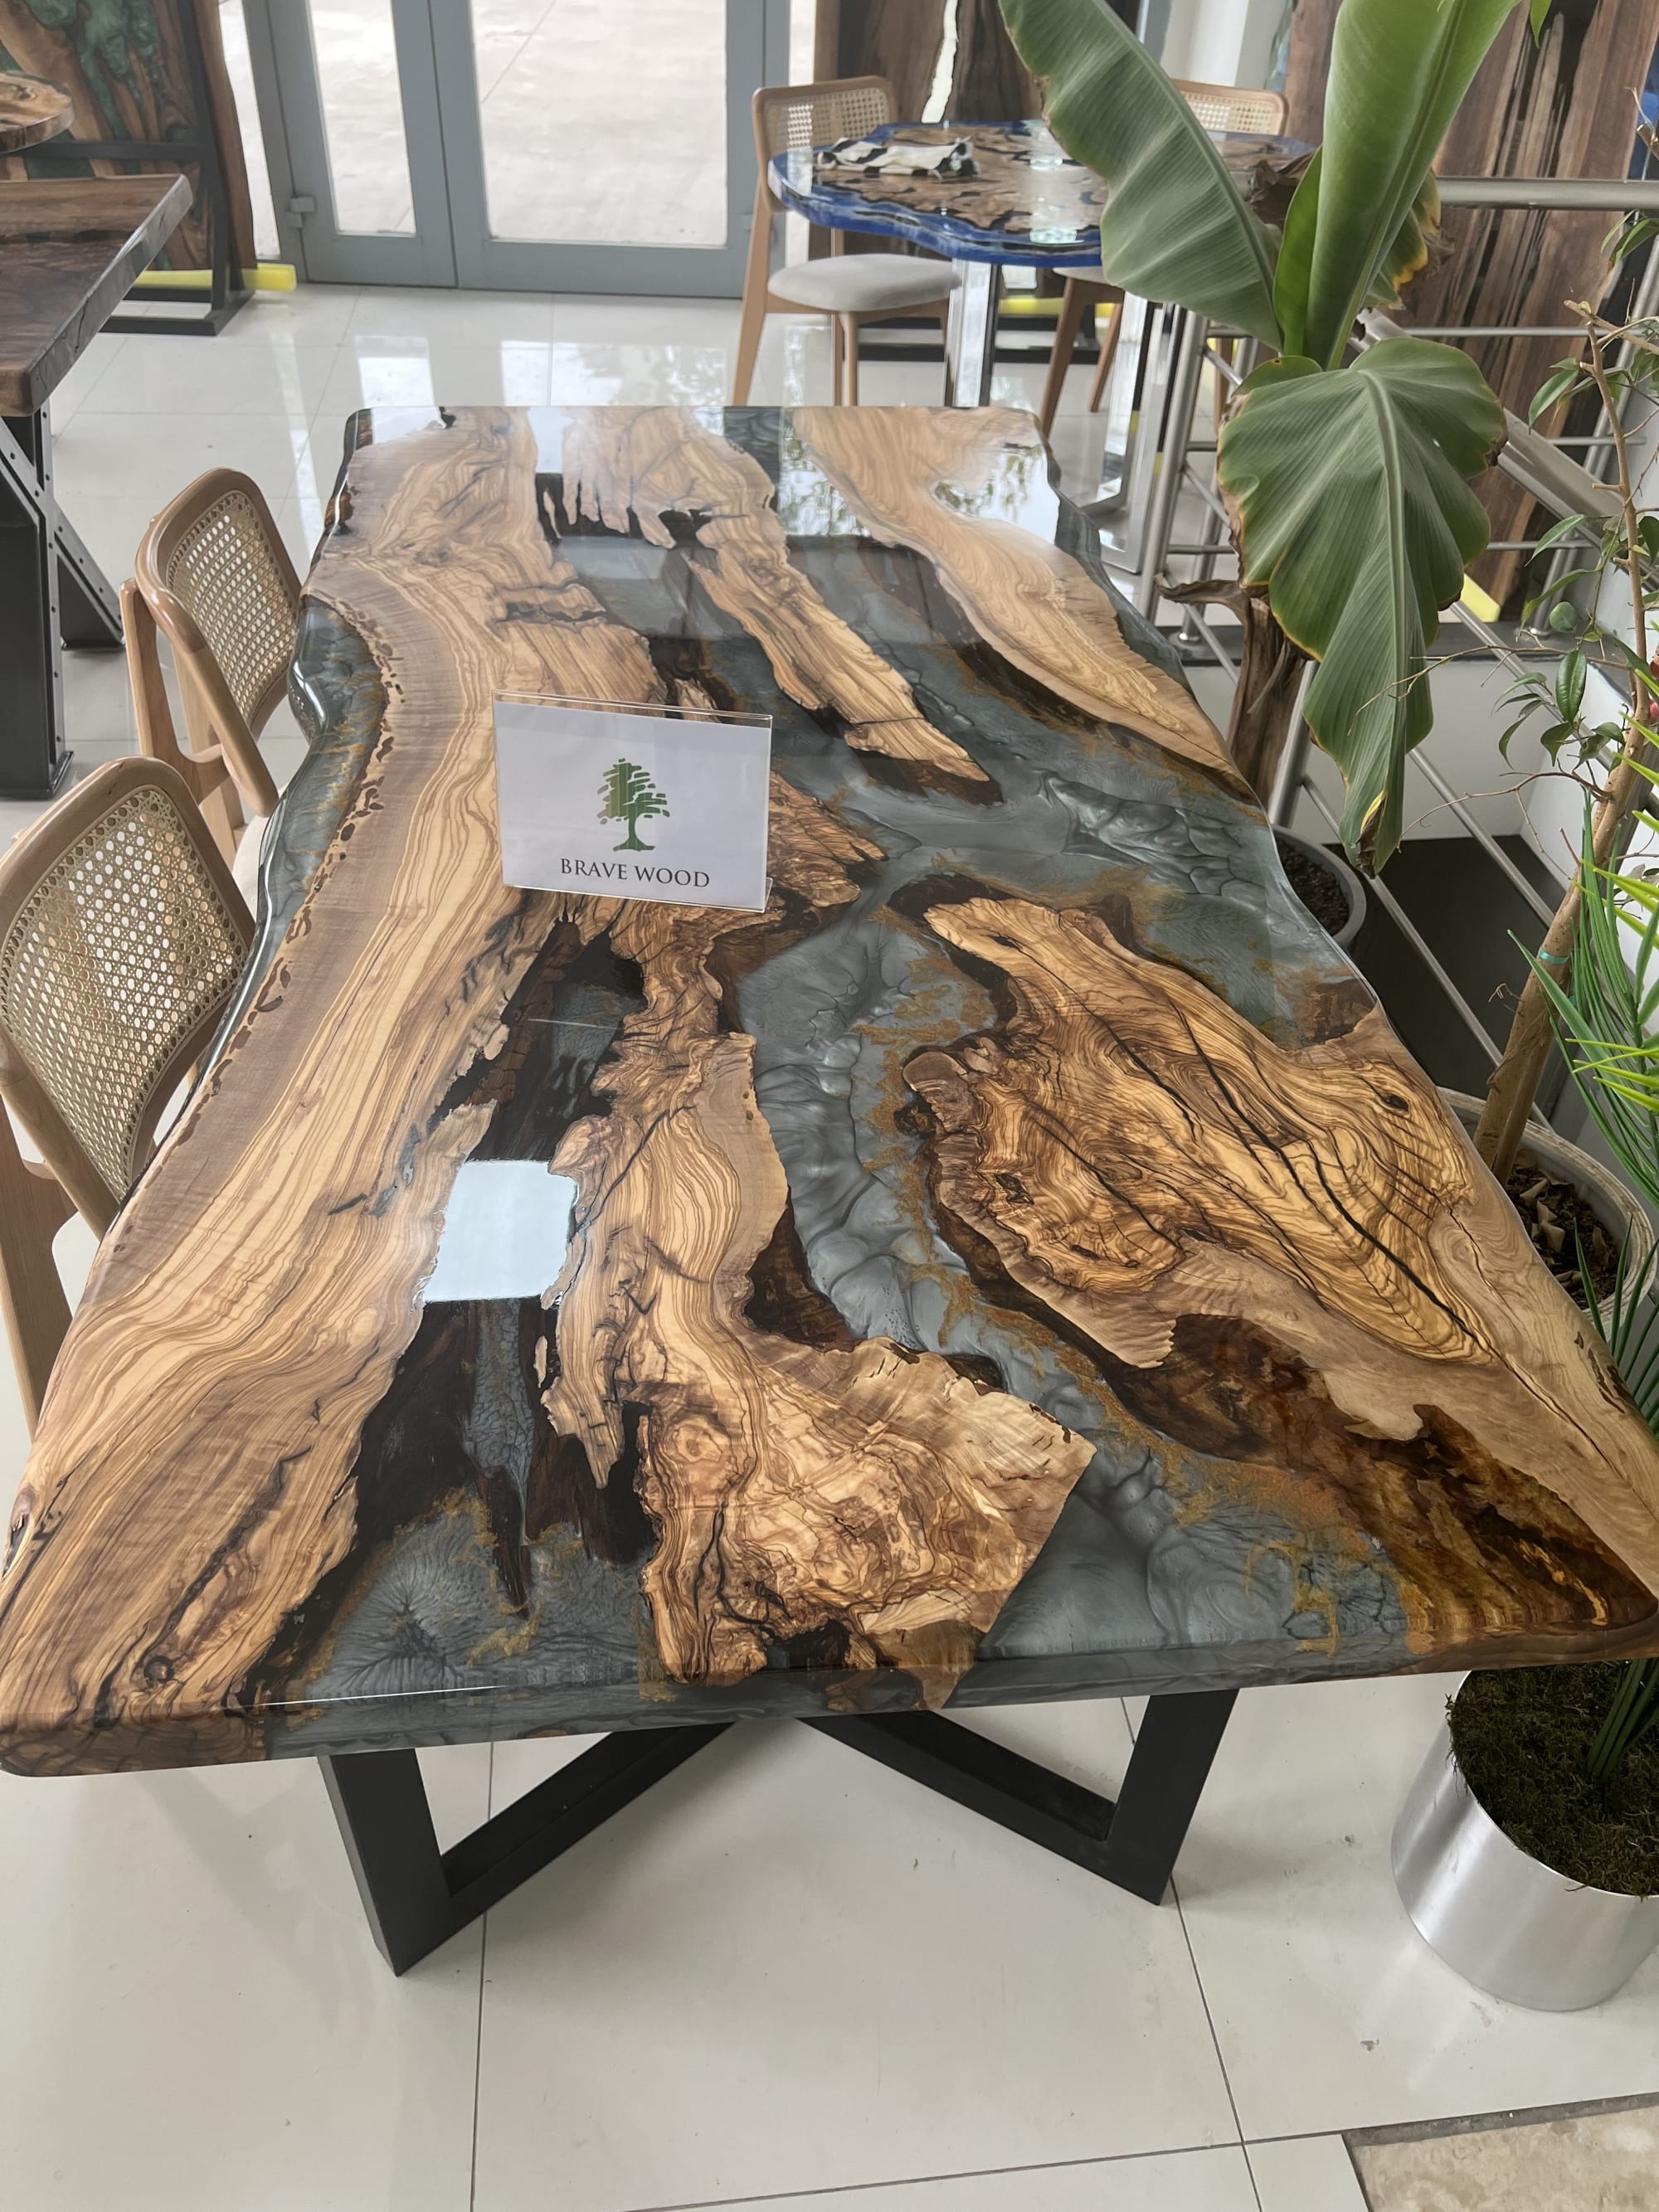 Green Epoxy Resin Table Top, Dining Farmhouse Furniture, Living